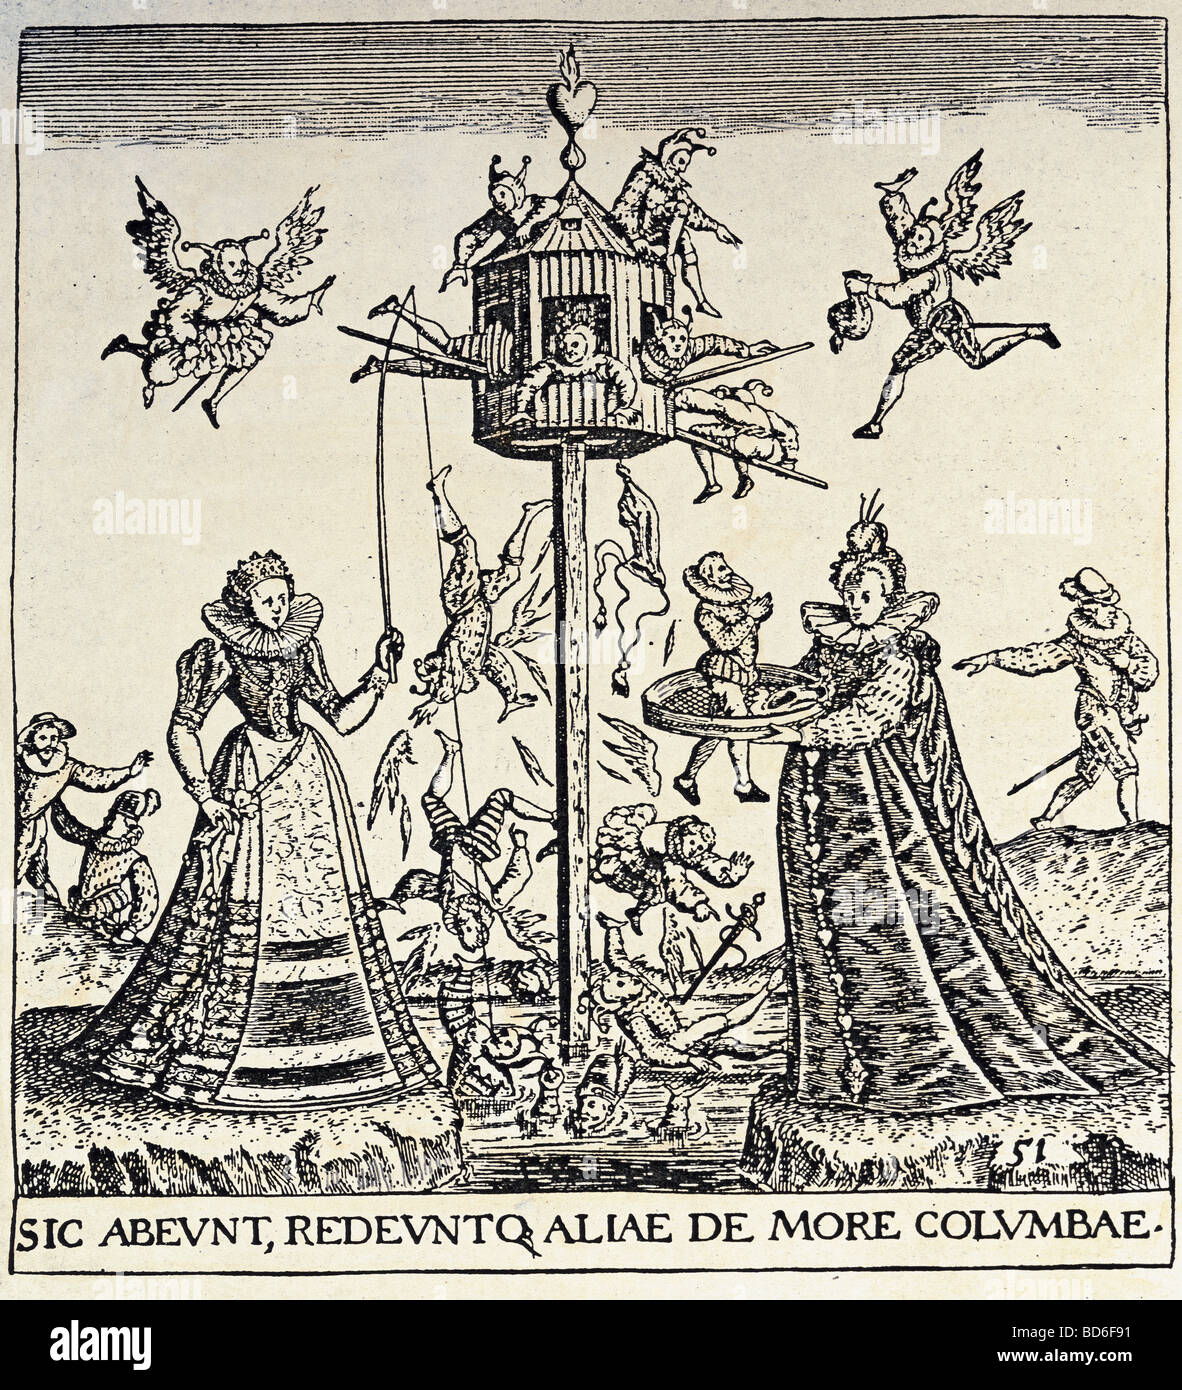 people, women, 16th - 18th century, caricature, men as fools in a pigeonry, copper engraving, by de Bry, Holland, early 17th century, private collection, historic, historical, woman, Netherlands, angling, fishing, chosing, man, pigeon, pigeons, dove, doves, caricatures, graphic, graphics, print, prints, power, might, female, male, Artist's Copyright has not to be cleared Stock Photo